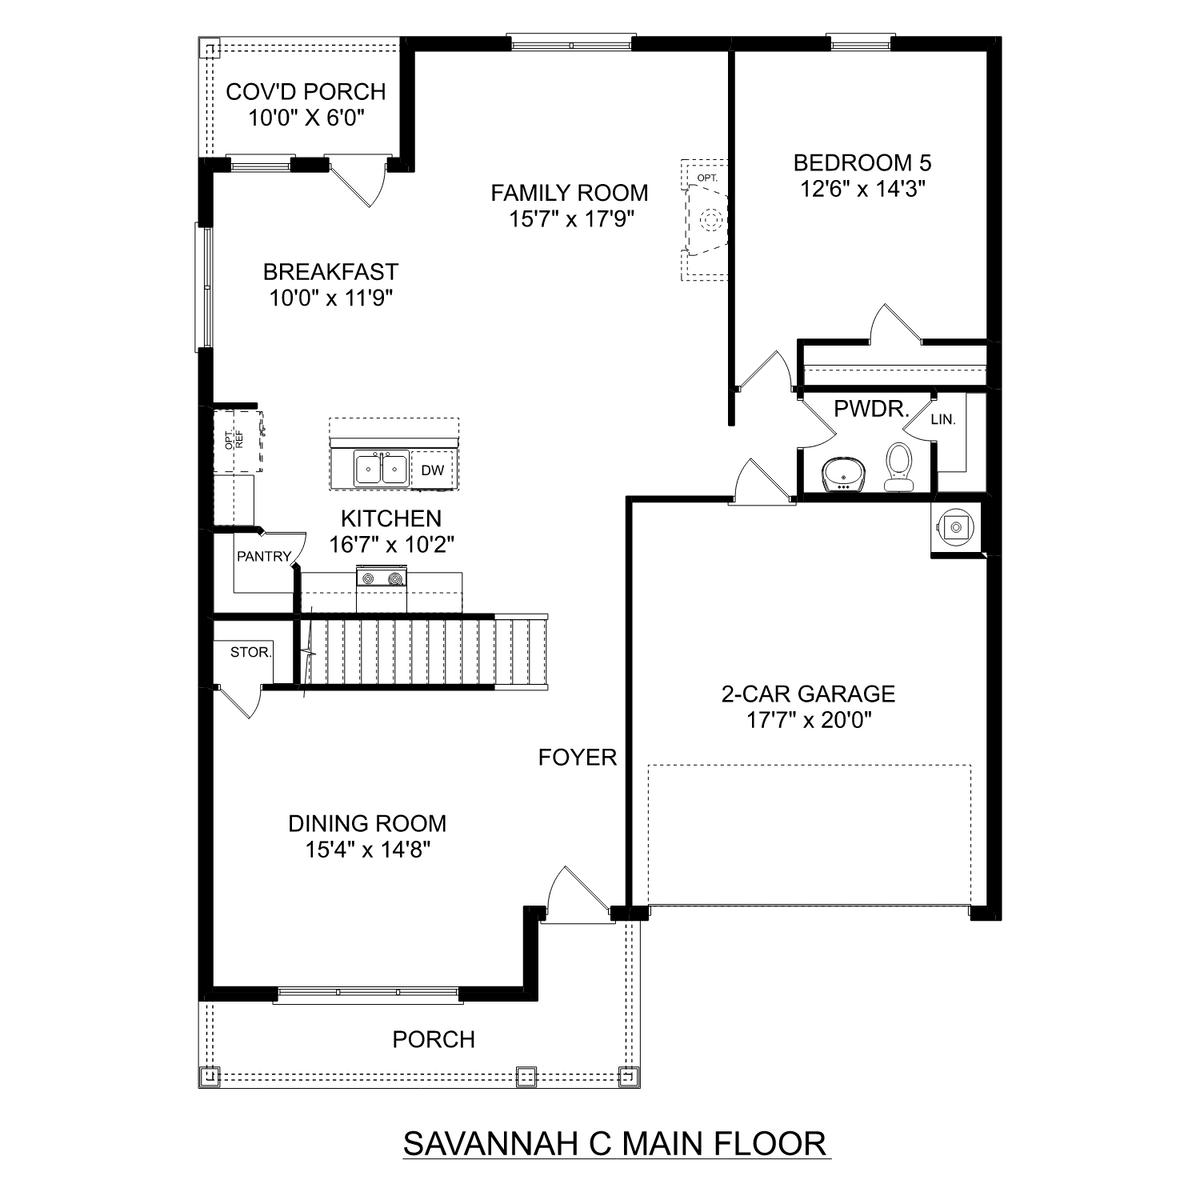 1 - The Savannah C floor plan layout for 2150 Mcafee Road in Davidson Homes' The Reserve at North Ridge community.